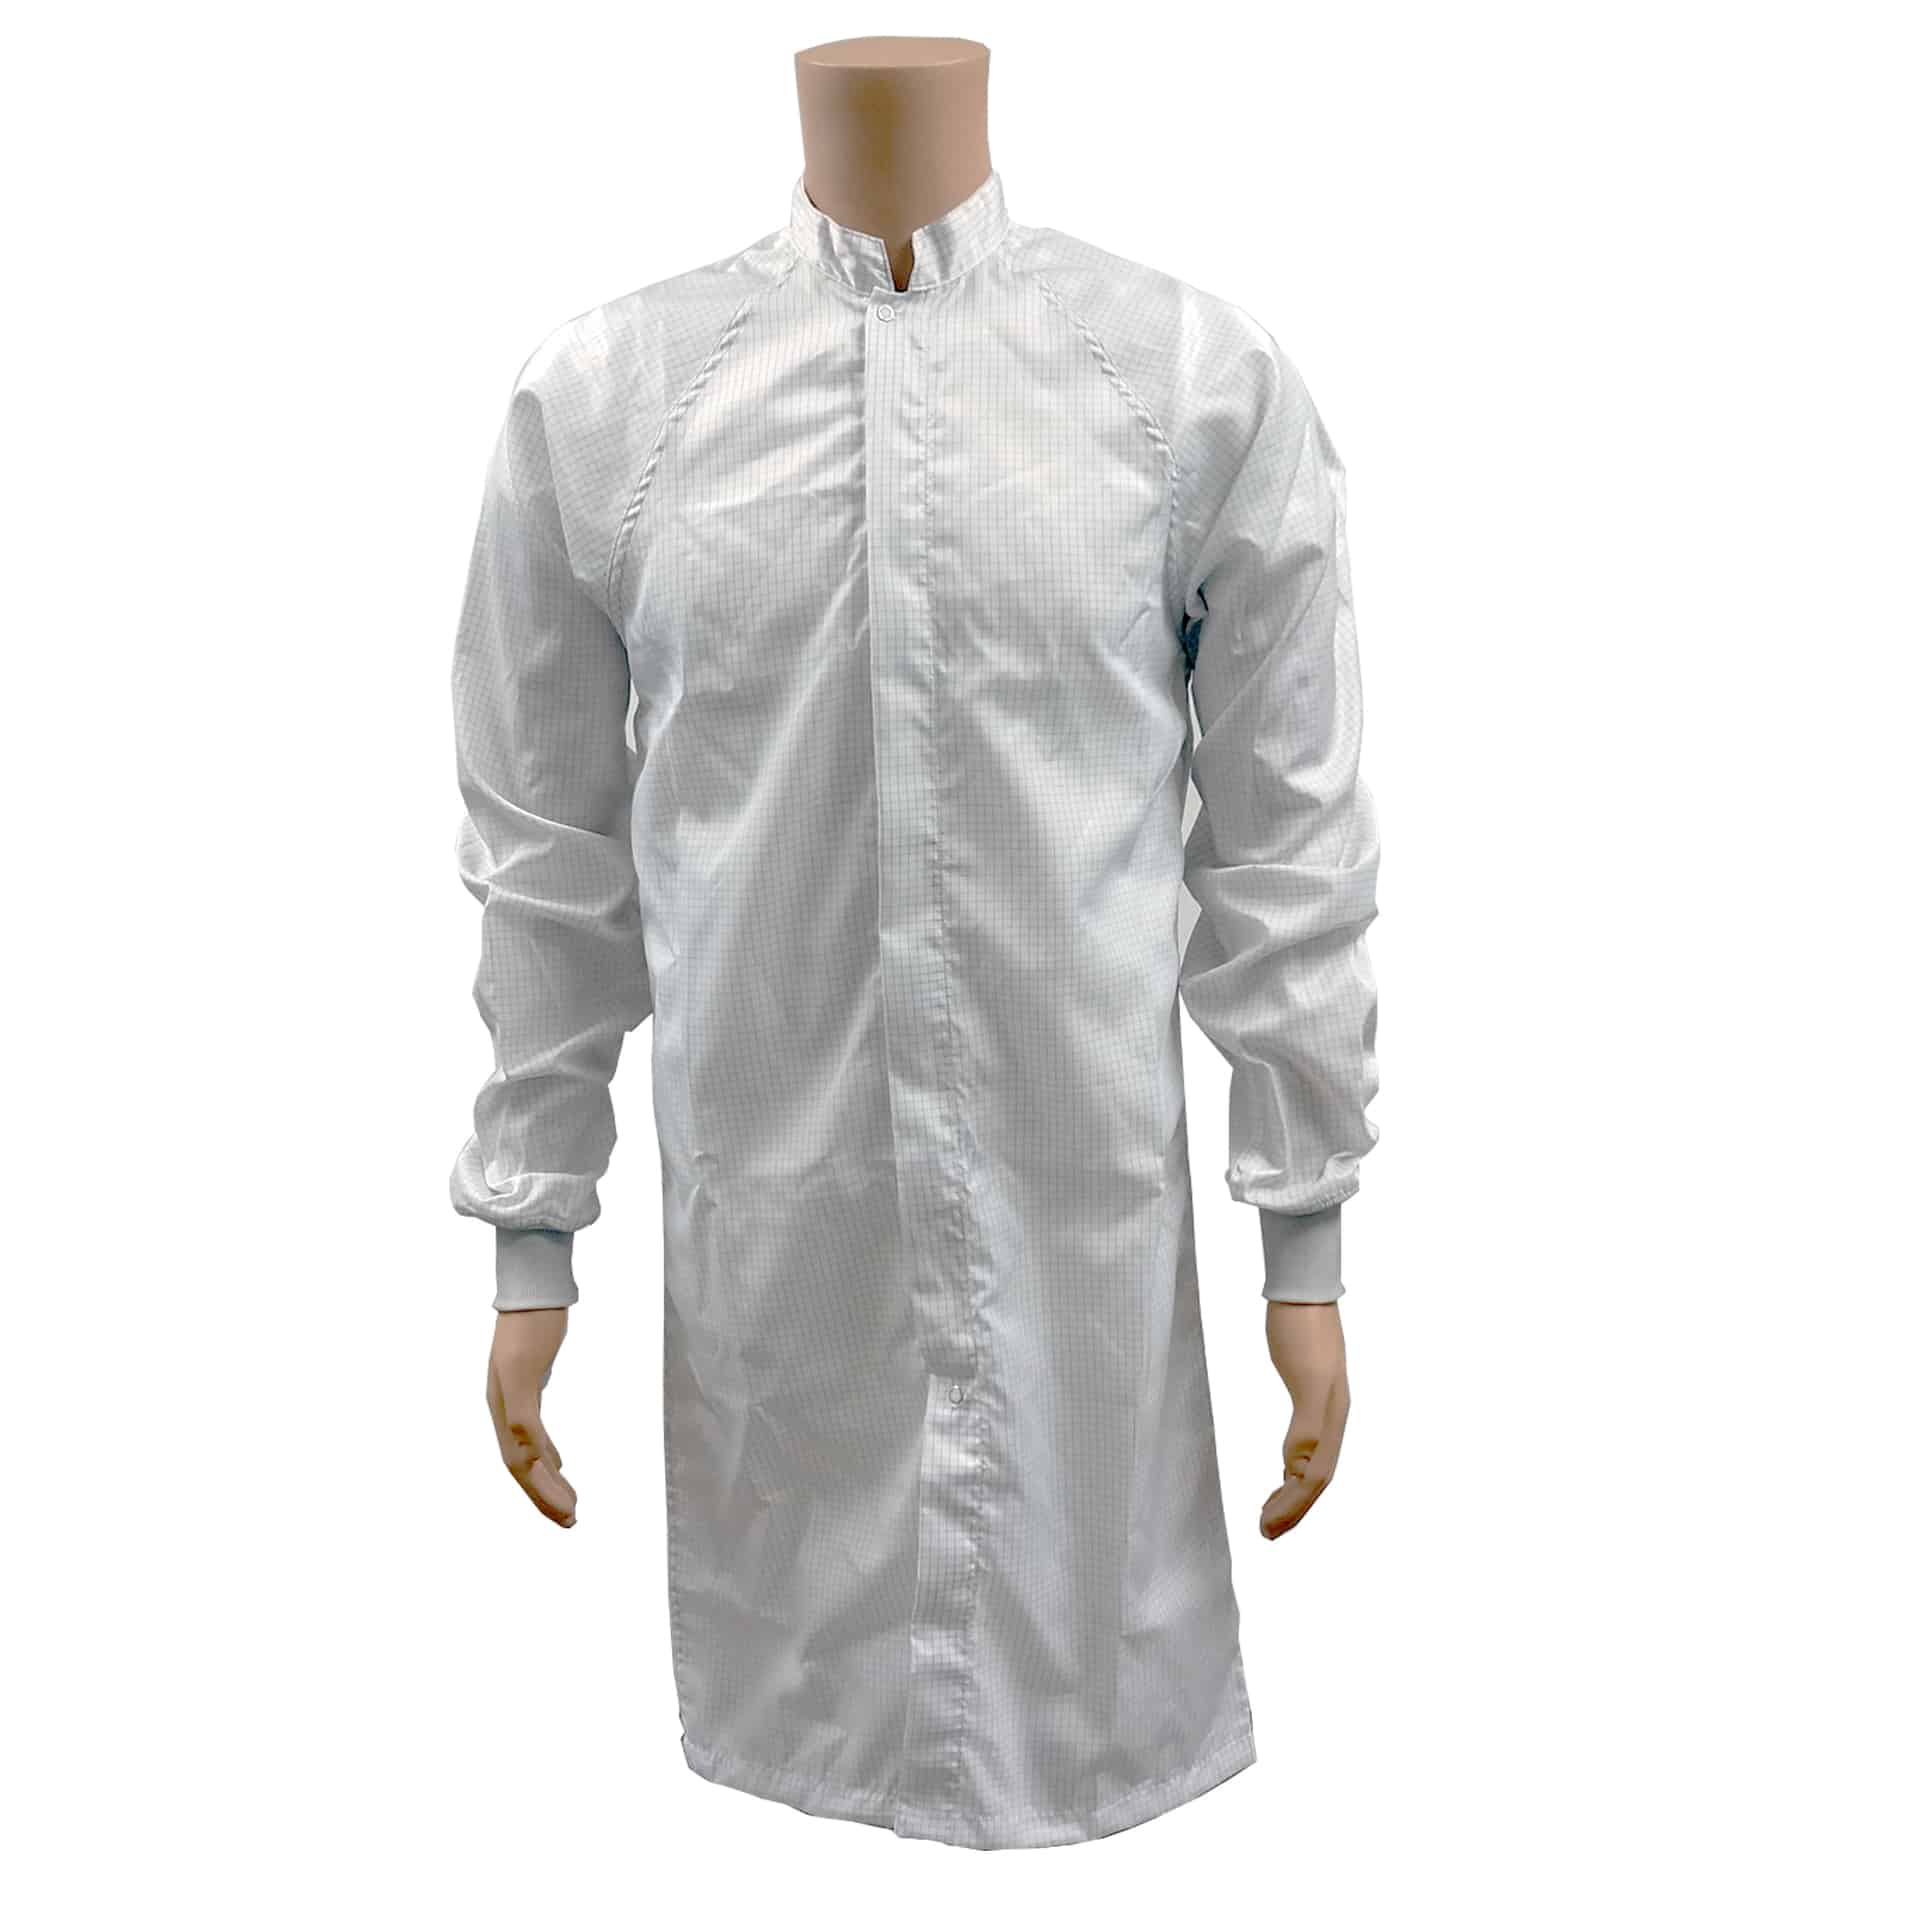 【DK-JLM6206WH】ESD CLEANROOM FROCK, WHITE, 2XL